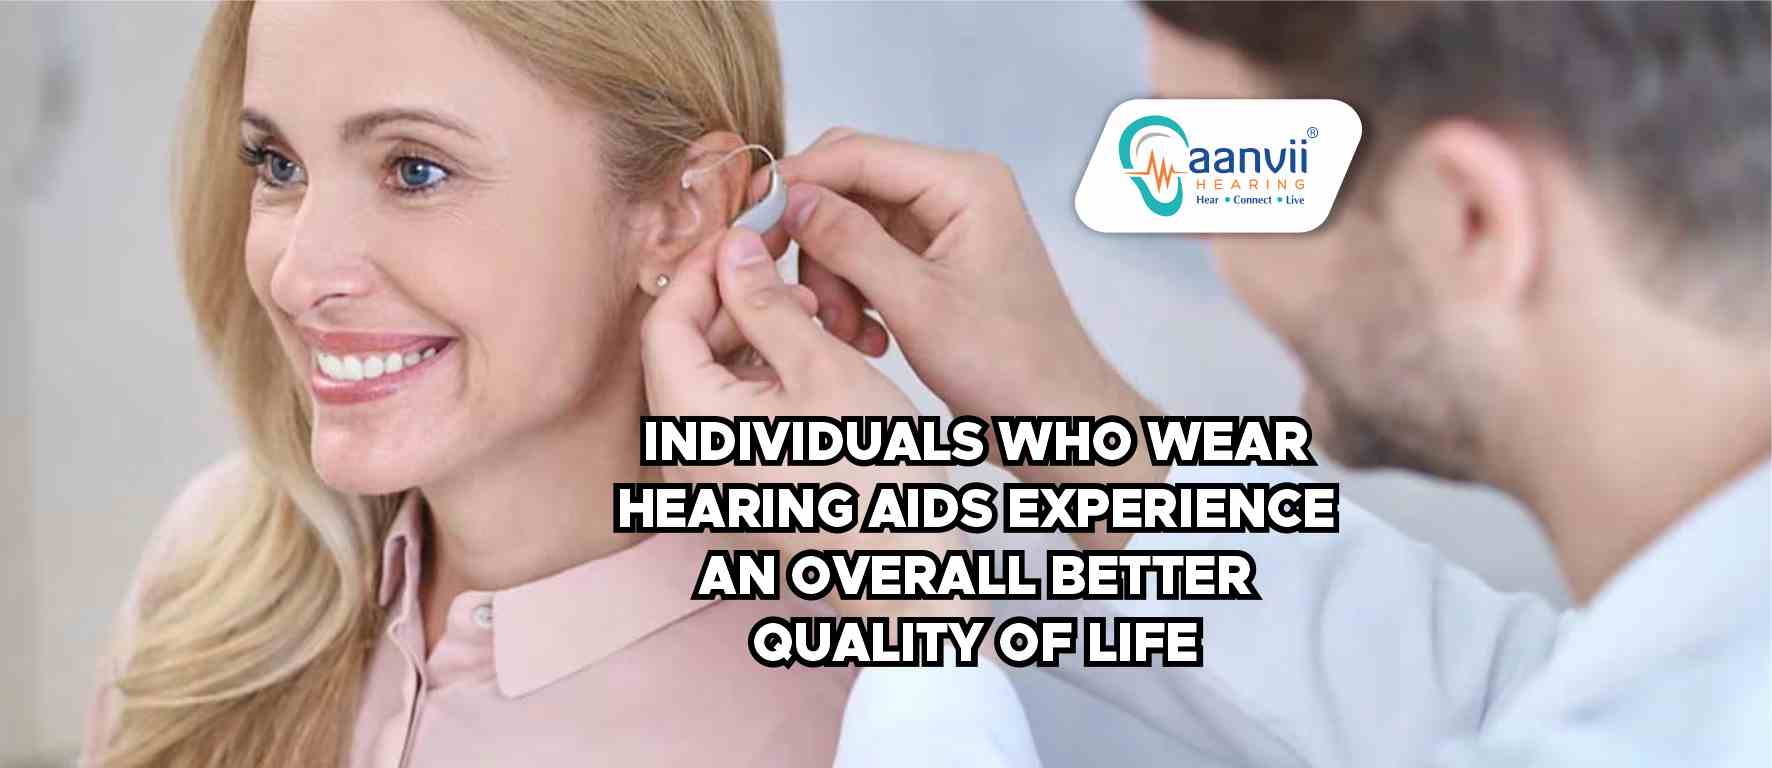 Exploring the Facts: Do Hearing Aids Cause Health Problems? Aanvii Hearing